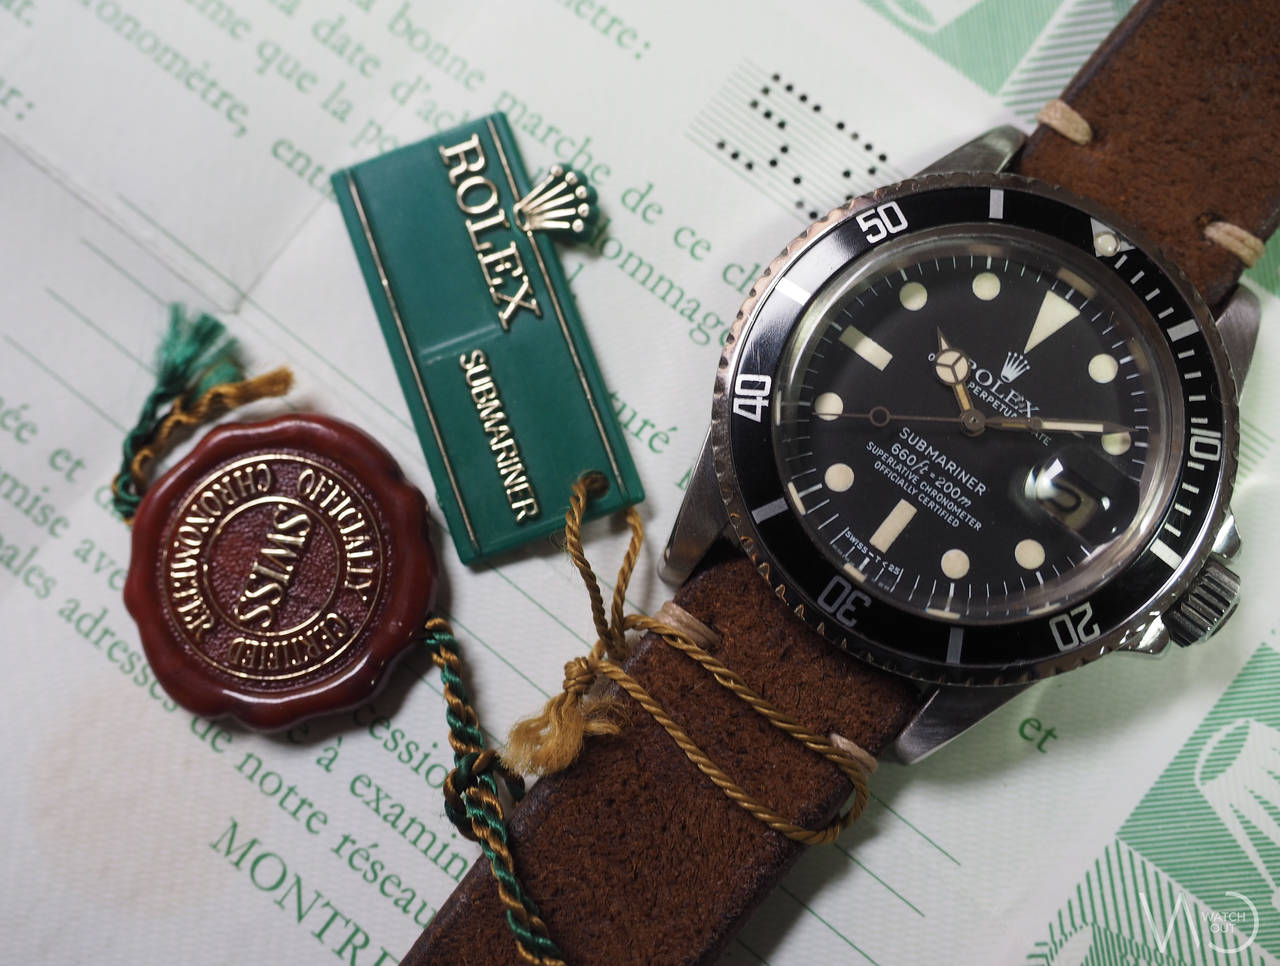 Rolex Stainless Steel Submariner Full Set Automatic Wristwatch Ref 1680 In Excellent Condition For Sale In Bologna, IT